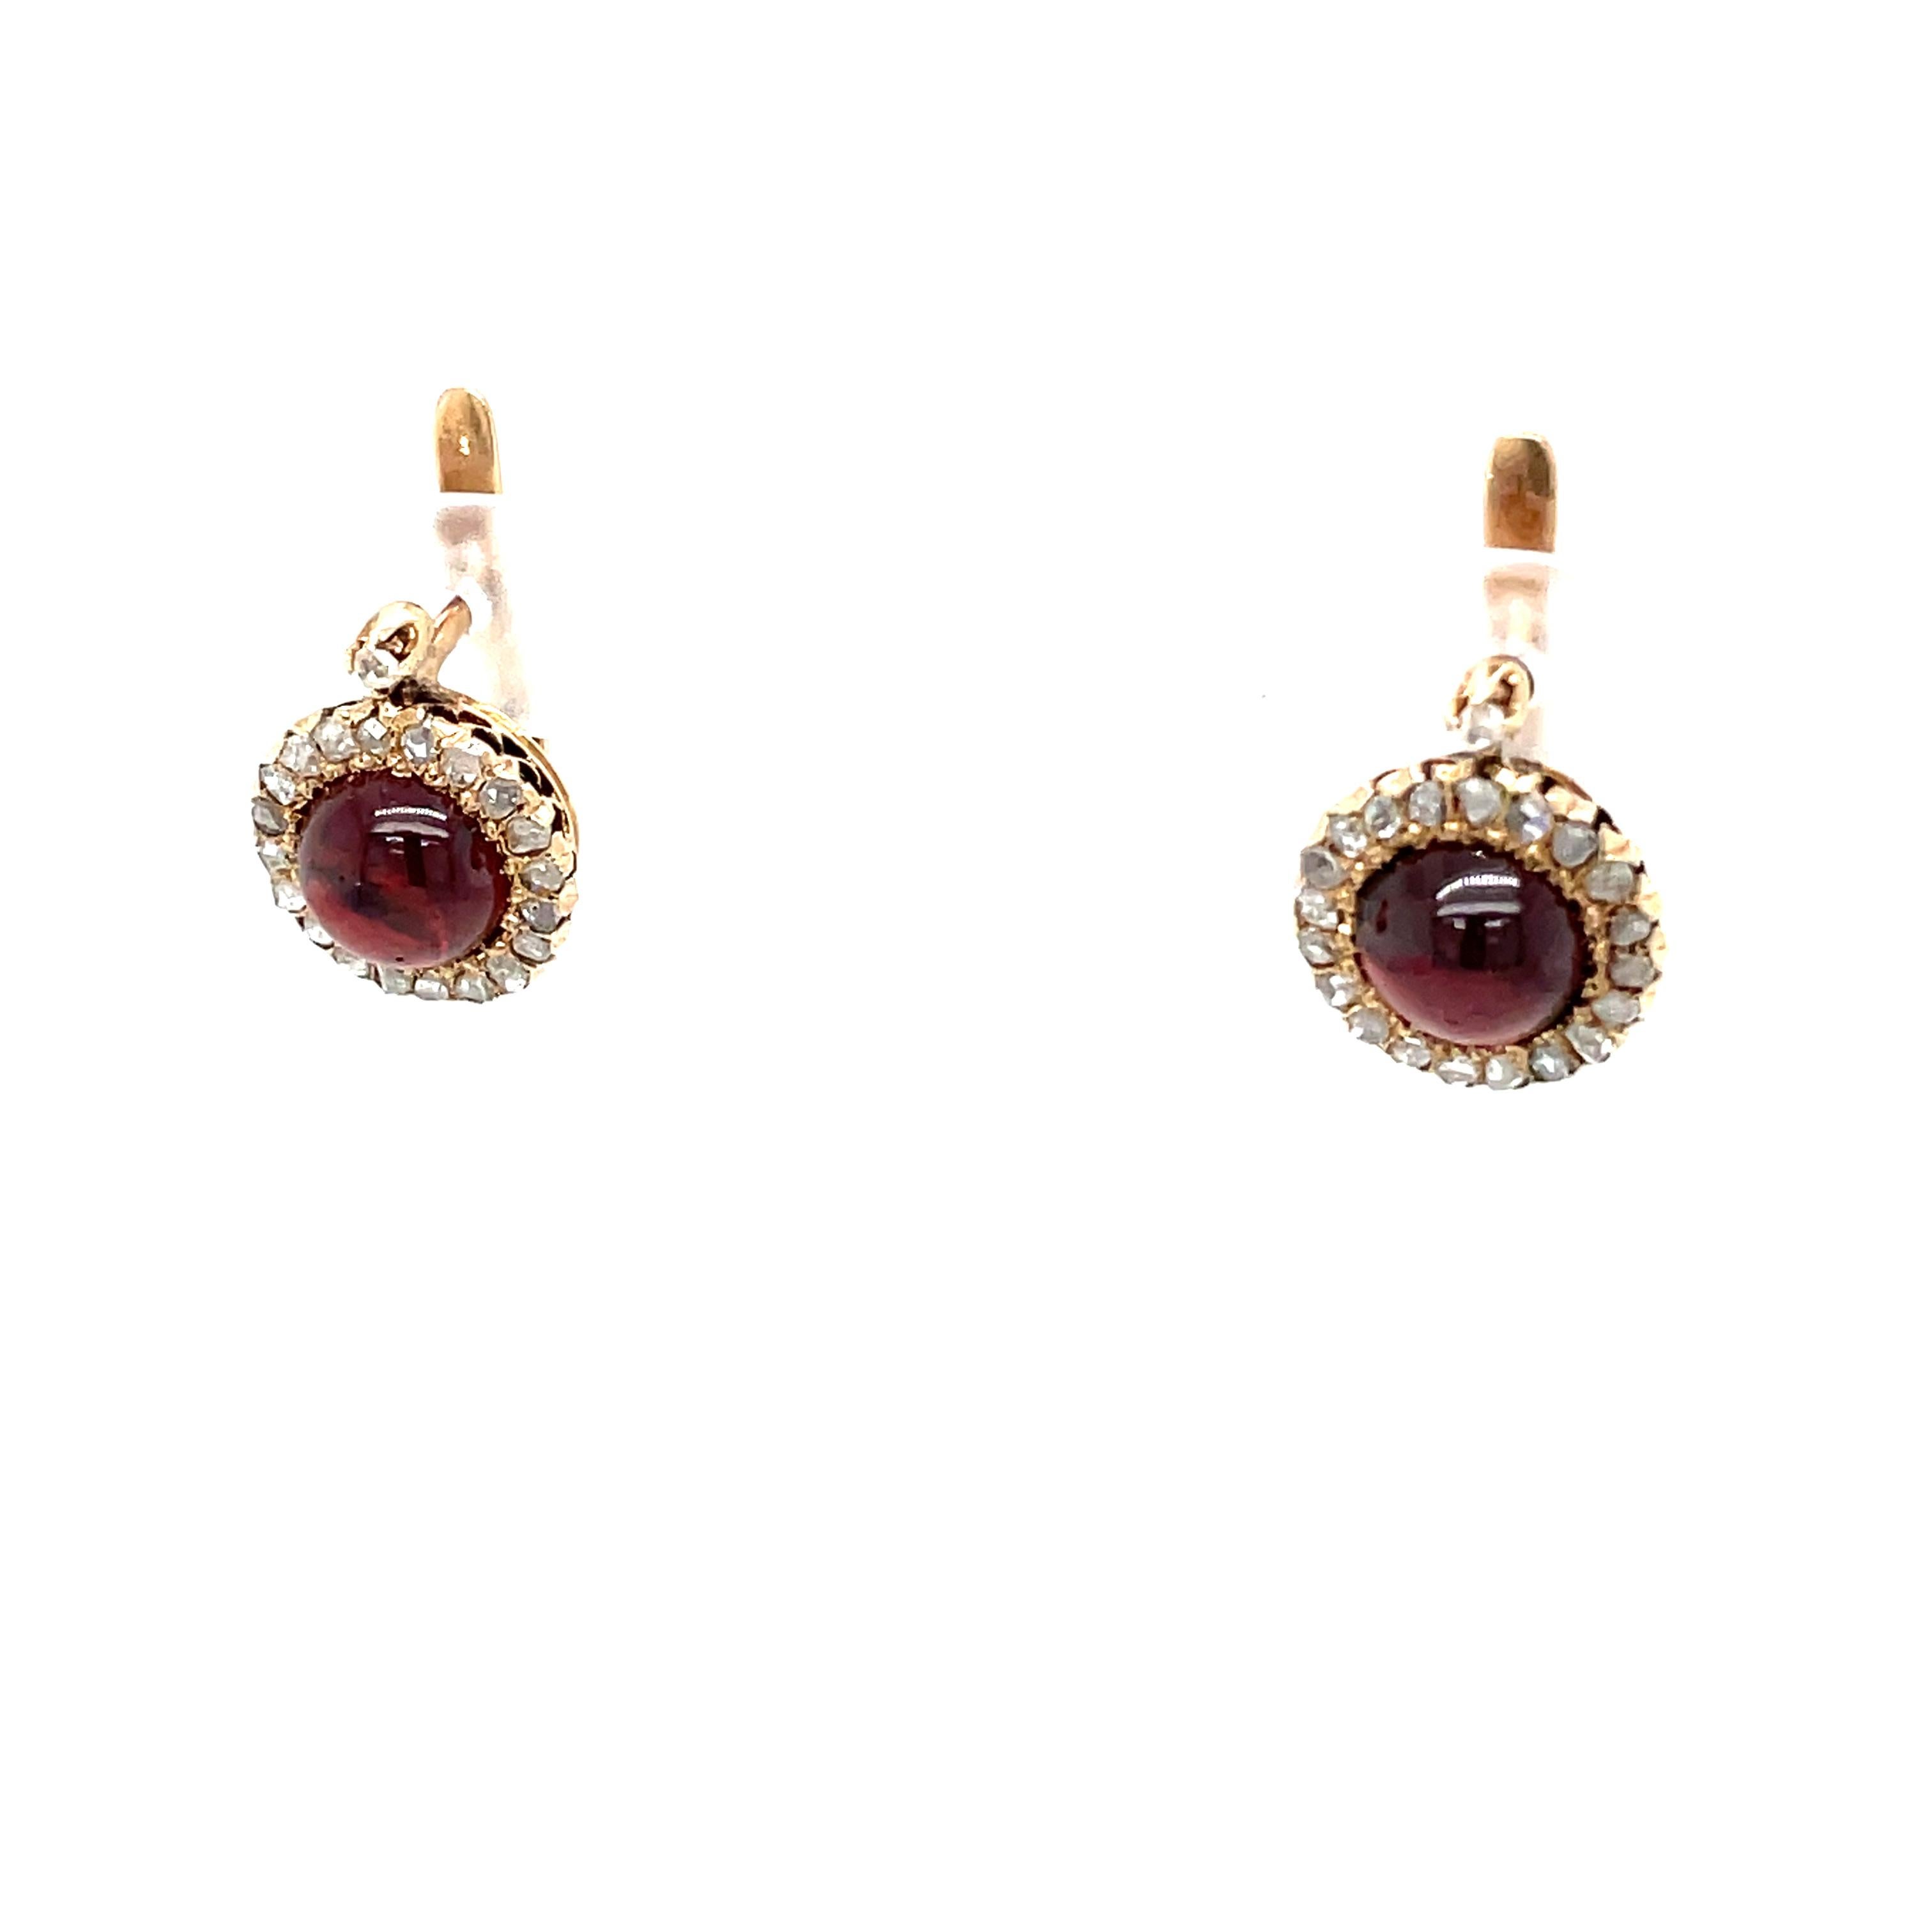 Stunning antique cluster earrings, in excellent conditions.
They are hand crafted in 12k yellow gold and silver, set with Sparkling and Large Garnets and framed in halo of old mine cut diamonds.

CONDITION: Pre-owned - Excellent 10/10
METAL: 12k